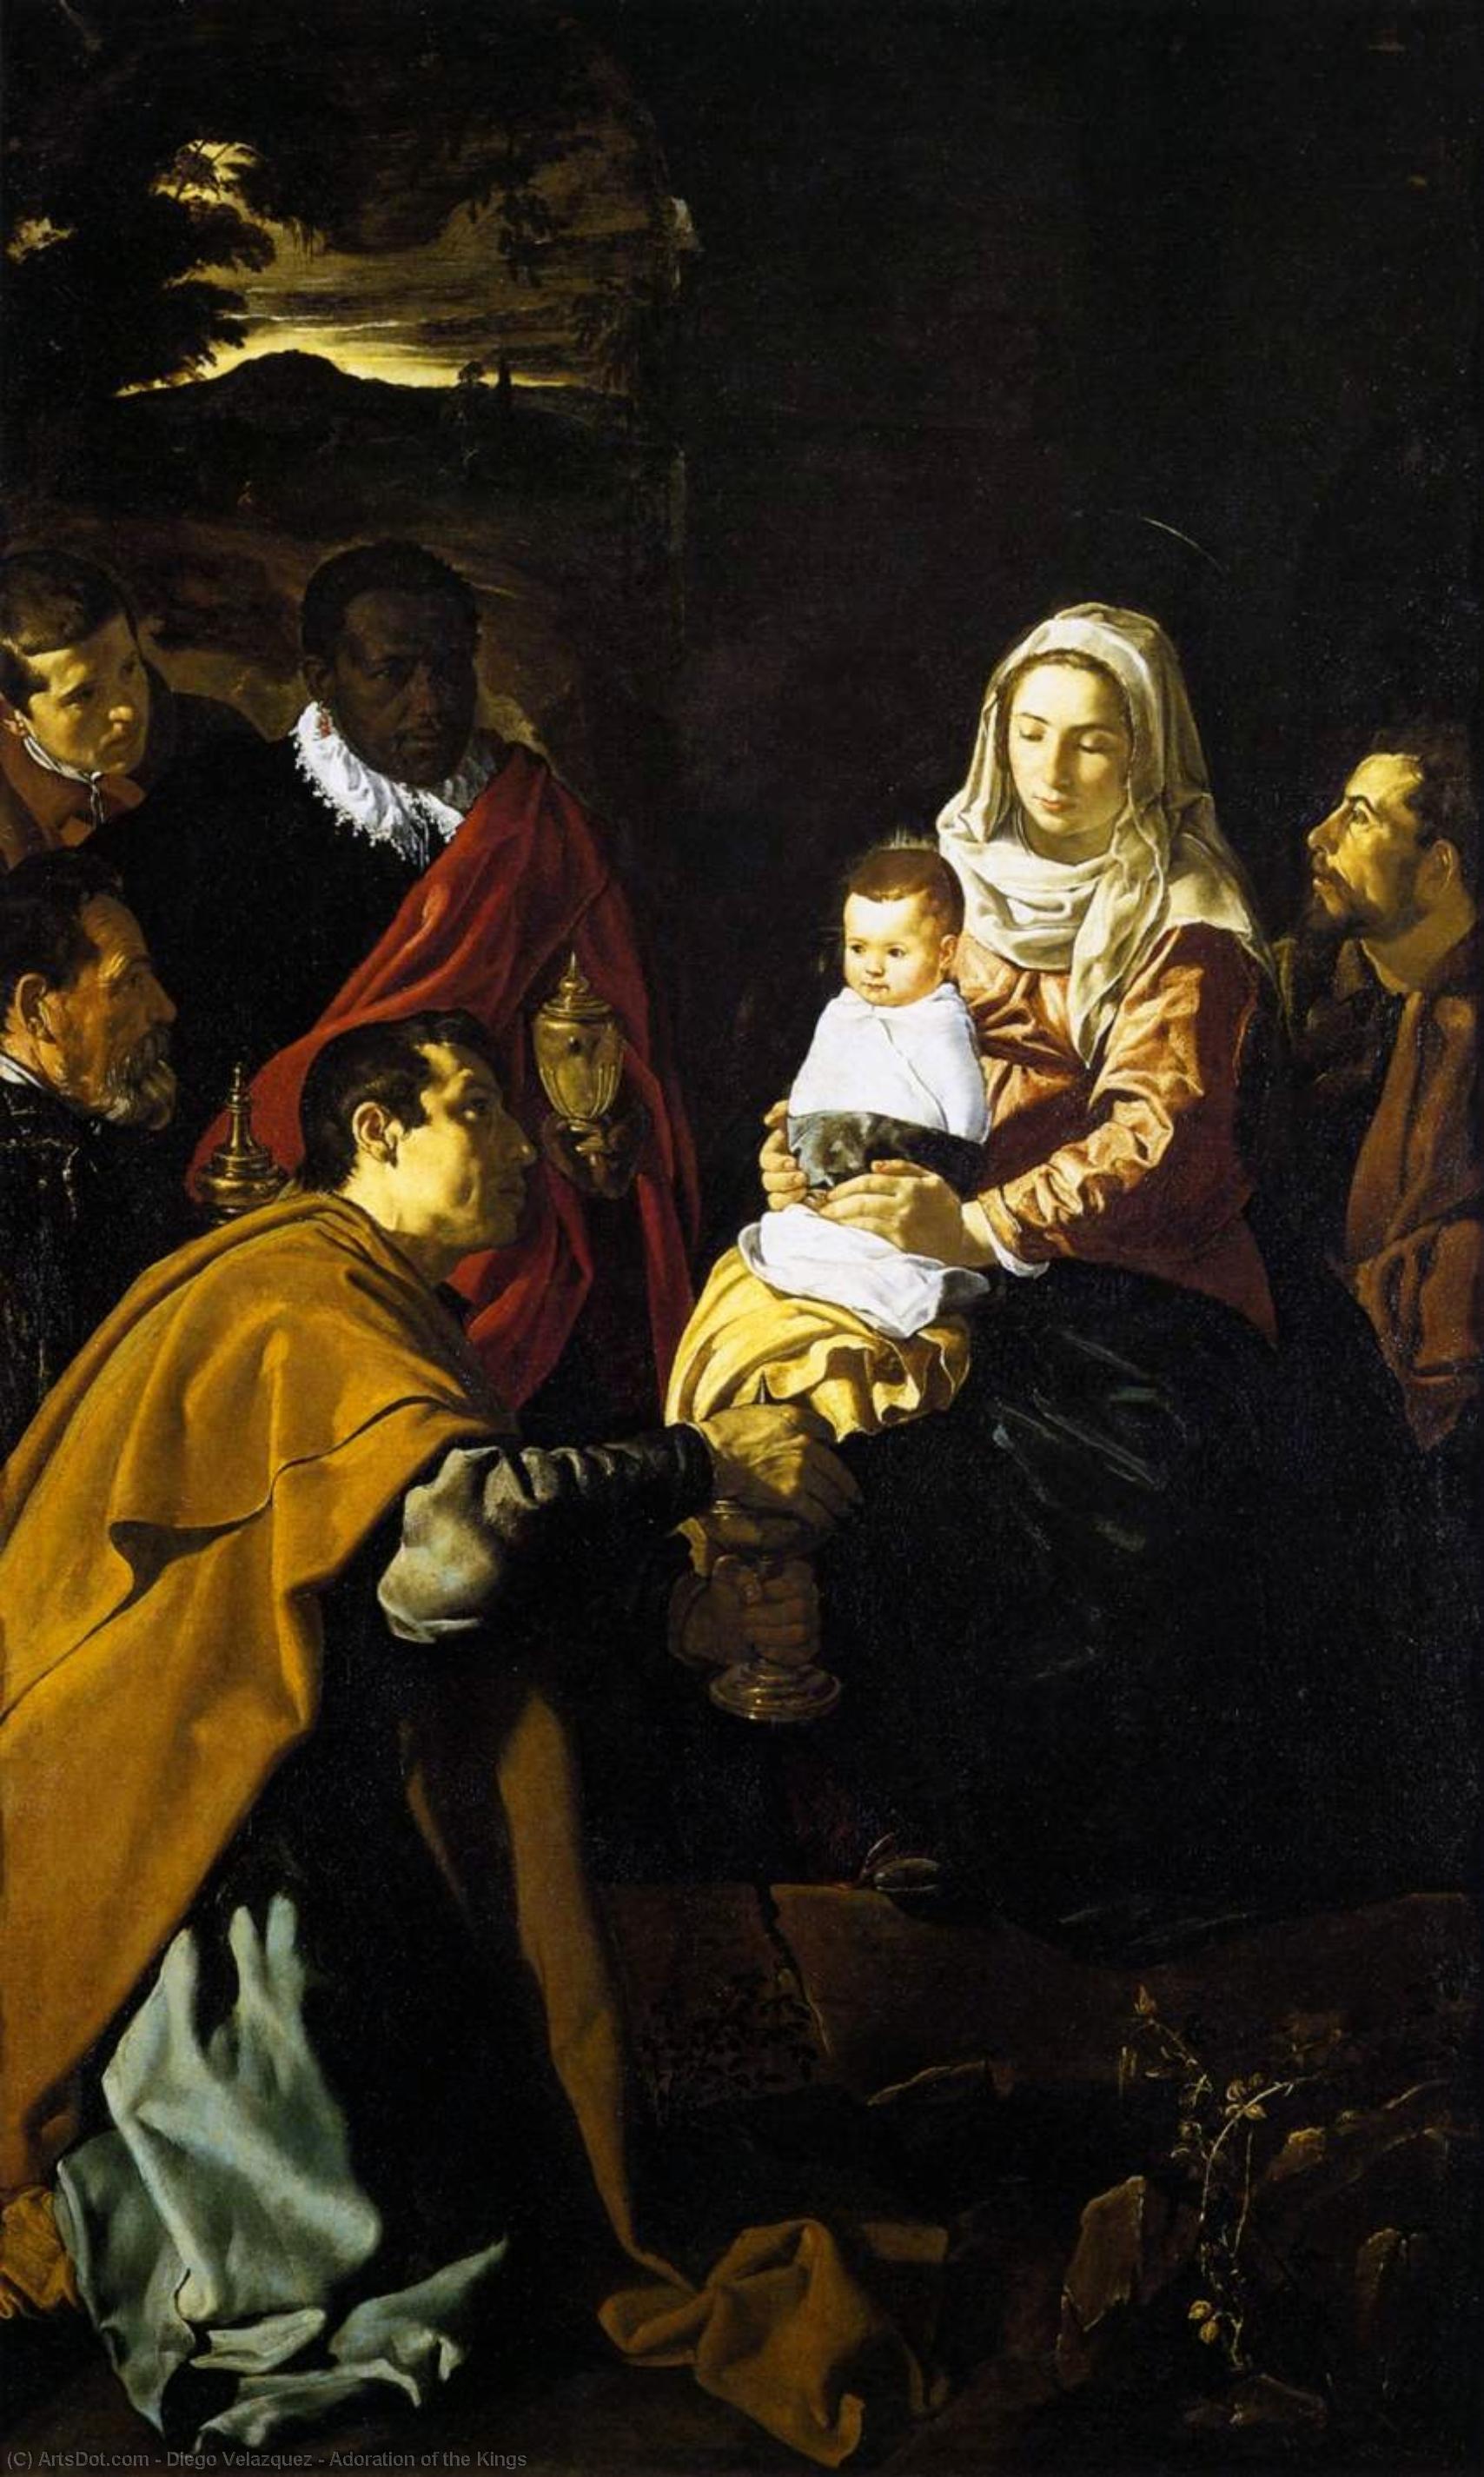 WikiOO.org - 백과 사전 - 회화, 삽화 Diego Velazquez - Adoration of the Kings